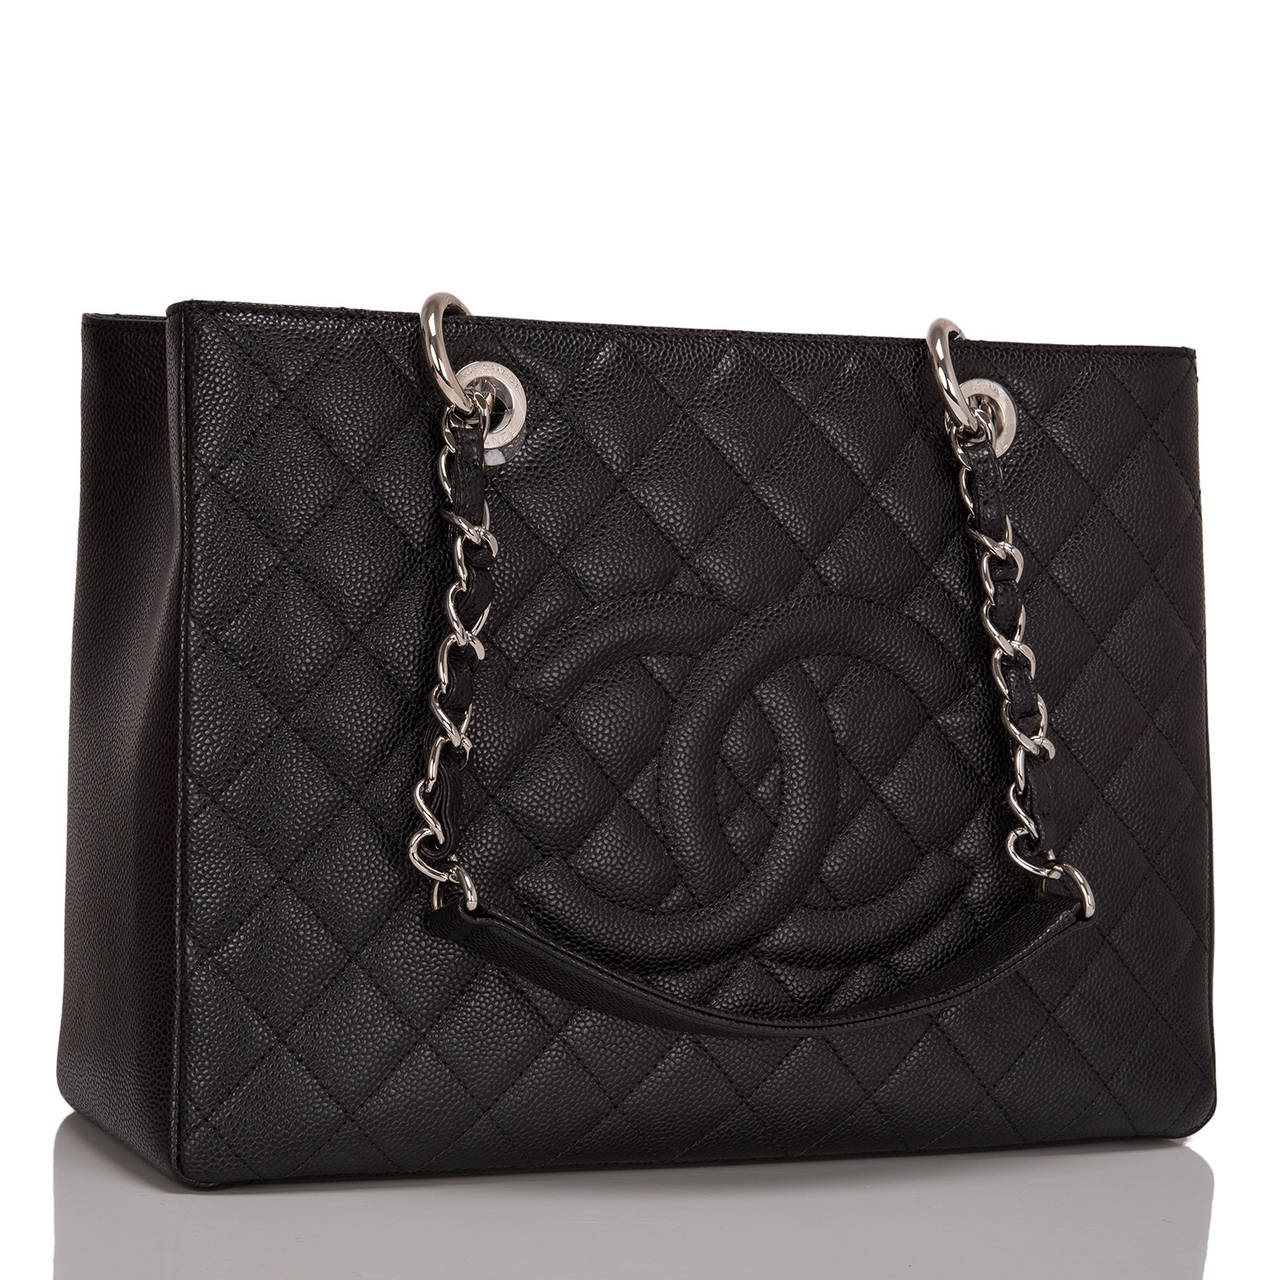 Chanel black quilted caviar leather Grand Shopper Tote (GST) bag with silver tone hardware.

This style features a front stitched CC logo, half moon back pocket and double interwoven silver tone chain link and leather padded straps.

The